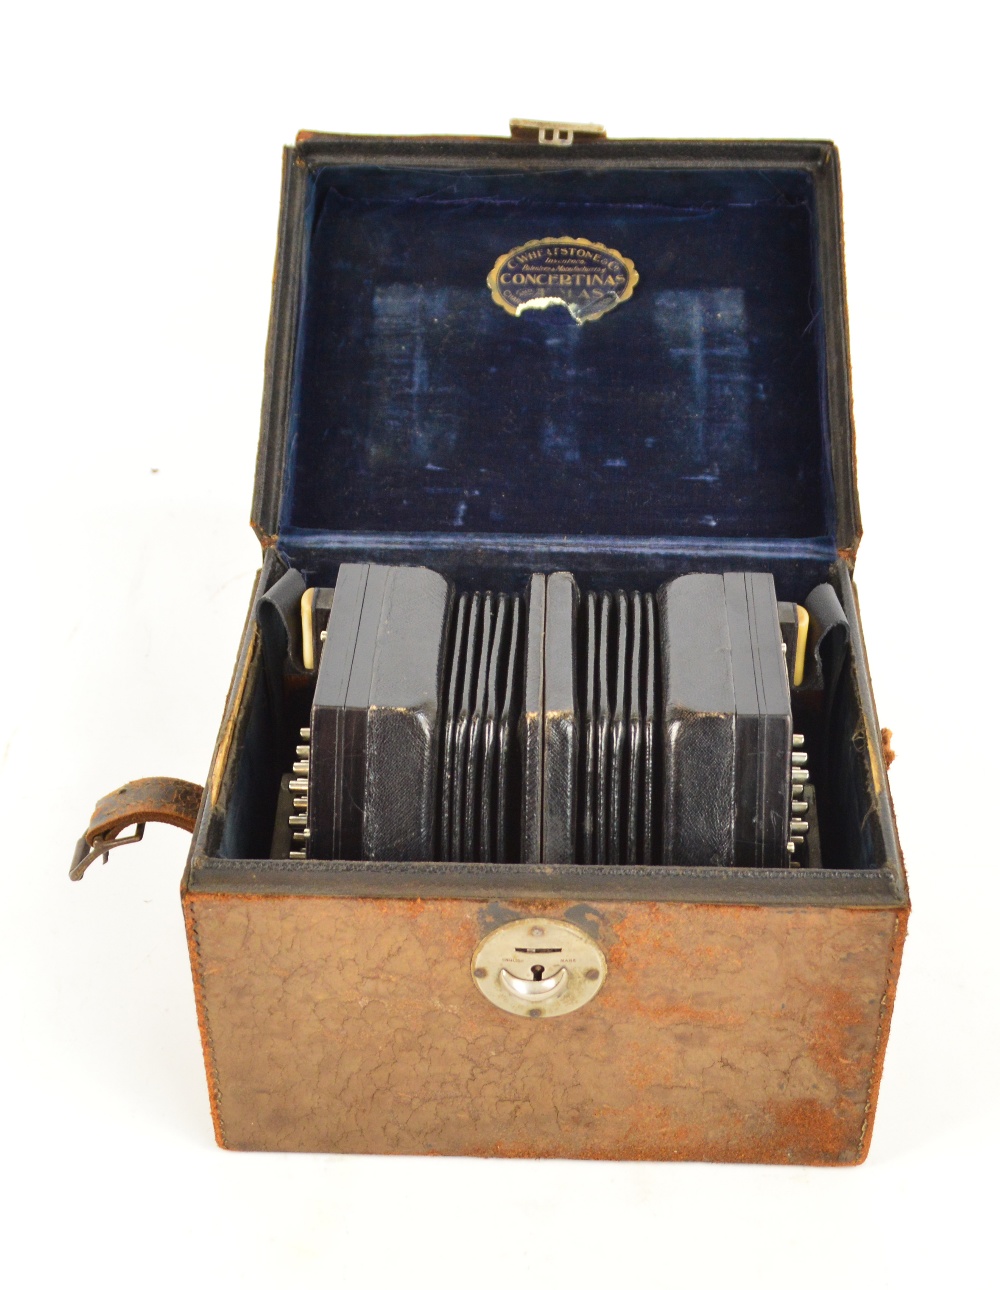 An early 20th century 46 key duet concertina by C Wheatstone & Co, London, serial no.27872, c.